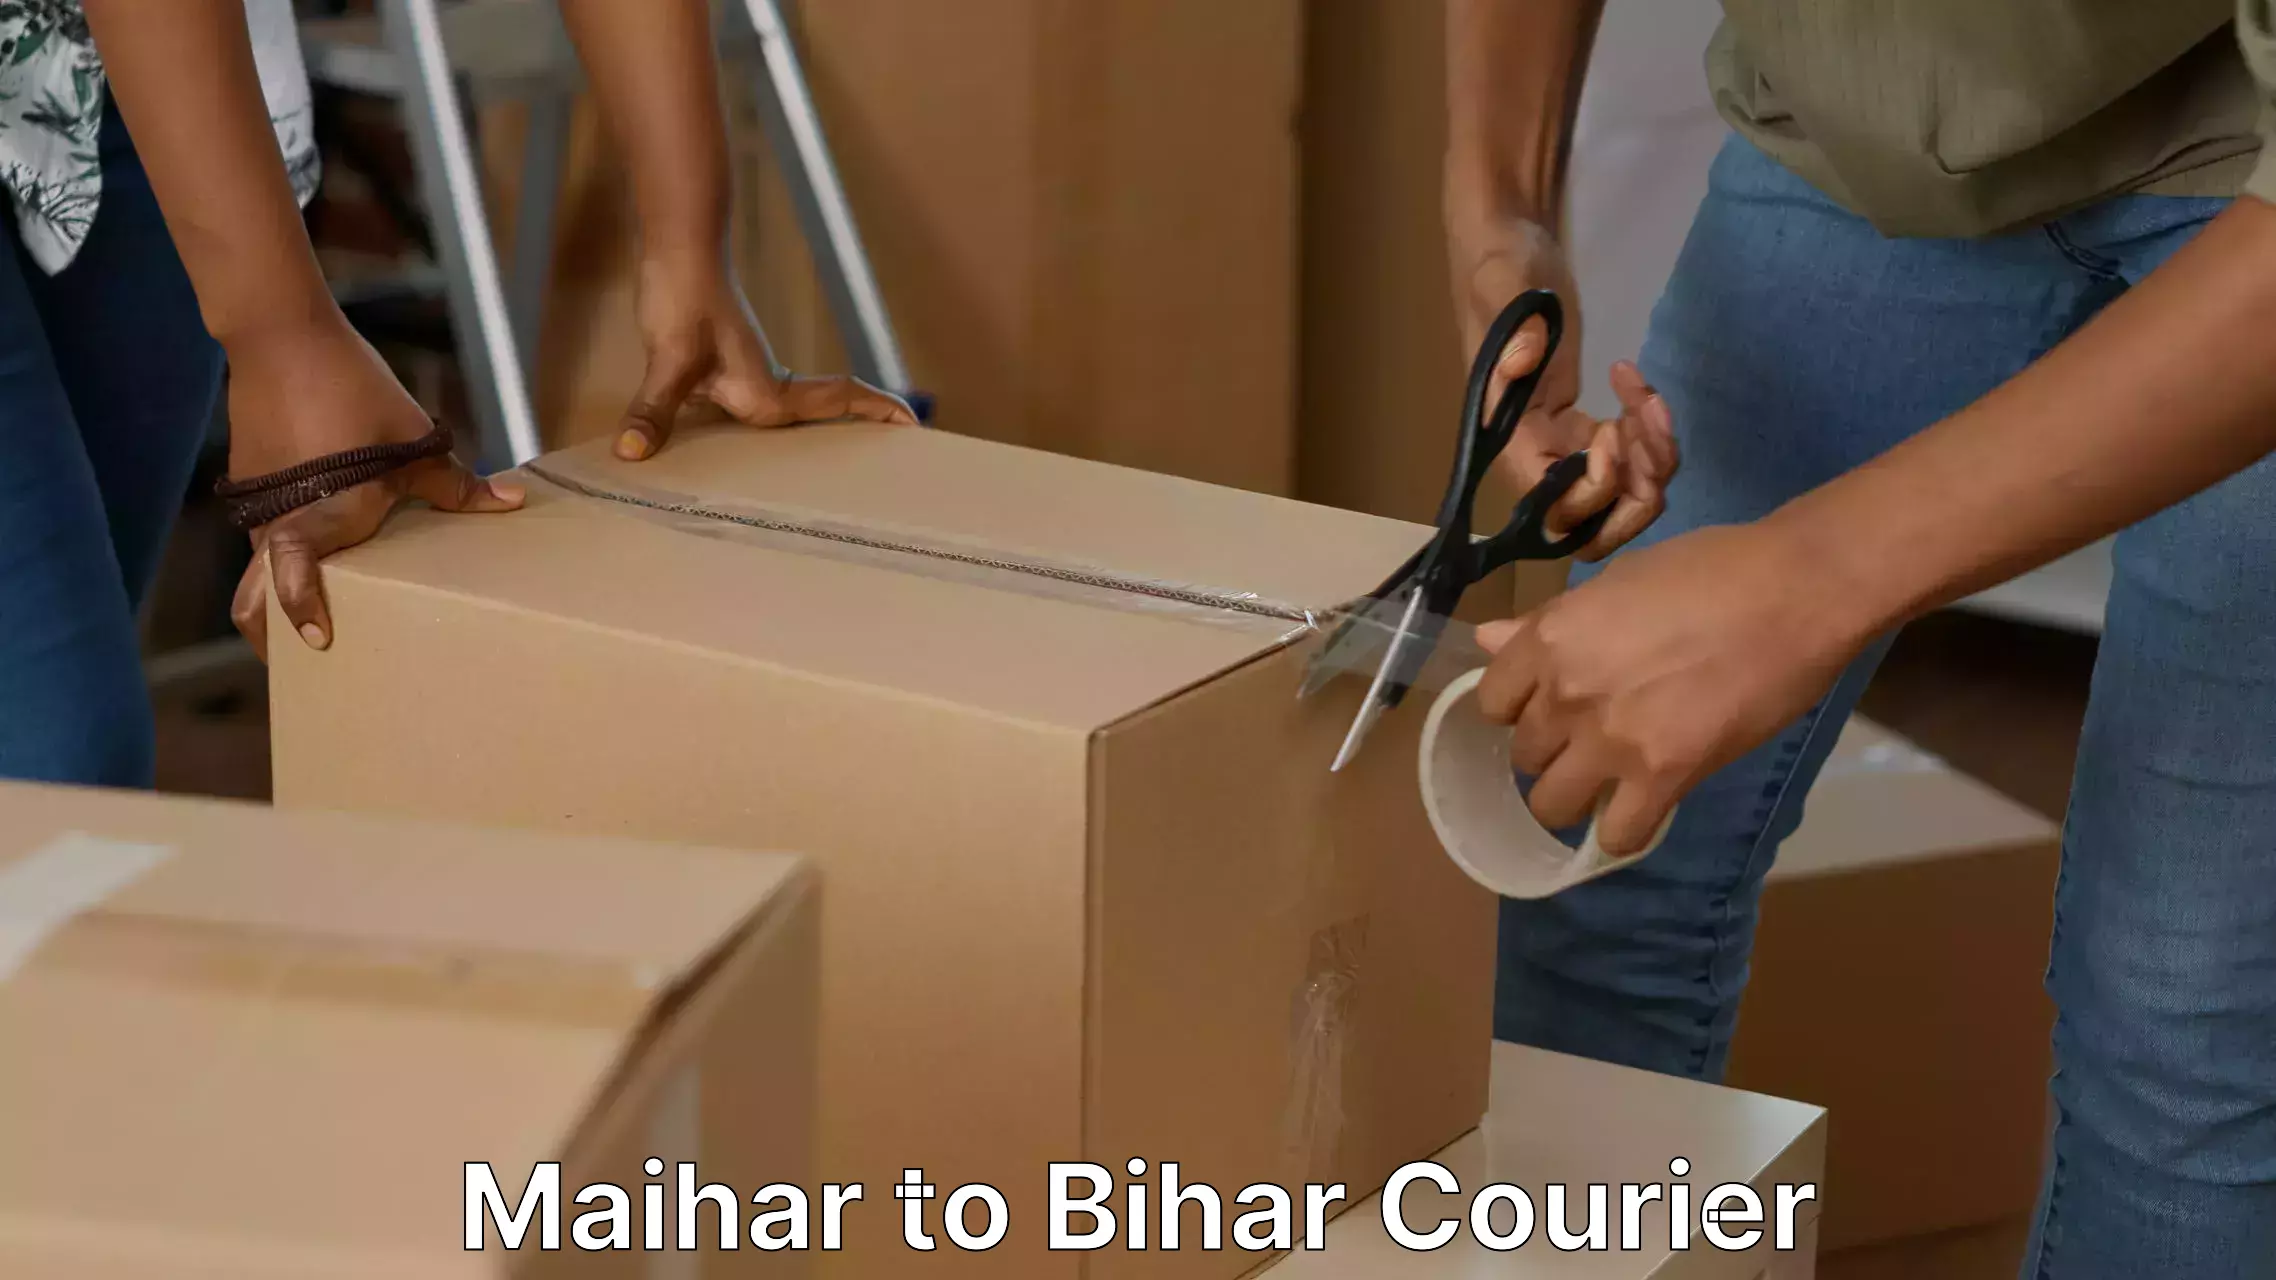 Skilled movers in Maihar to Marhowrah